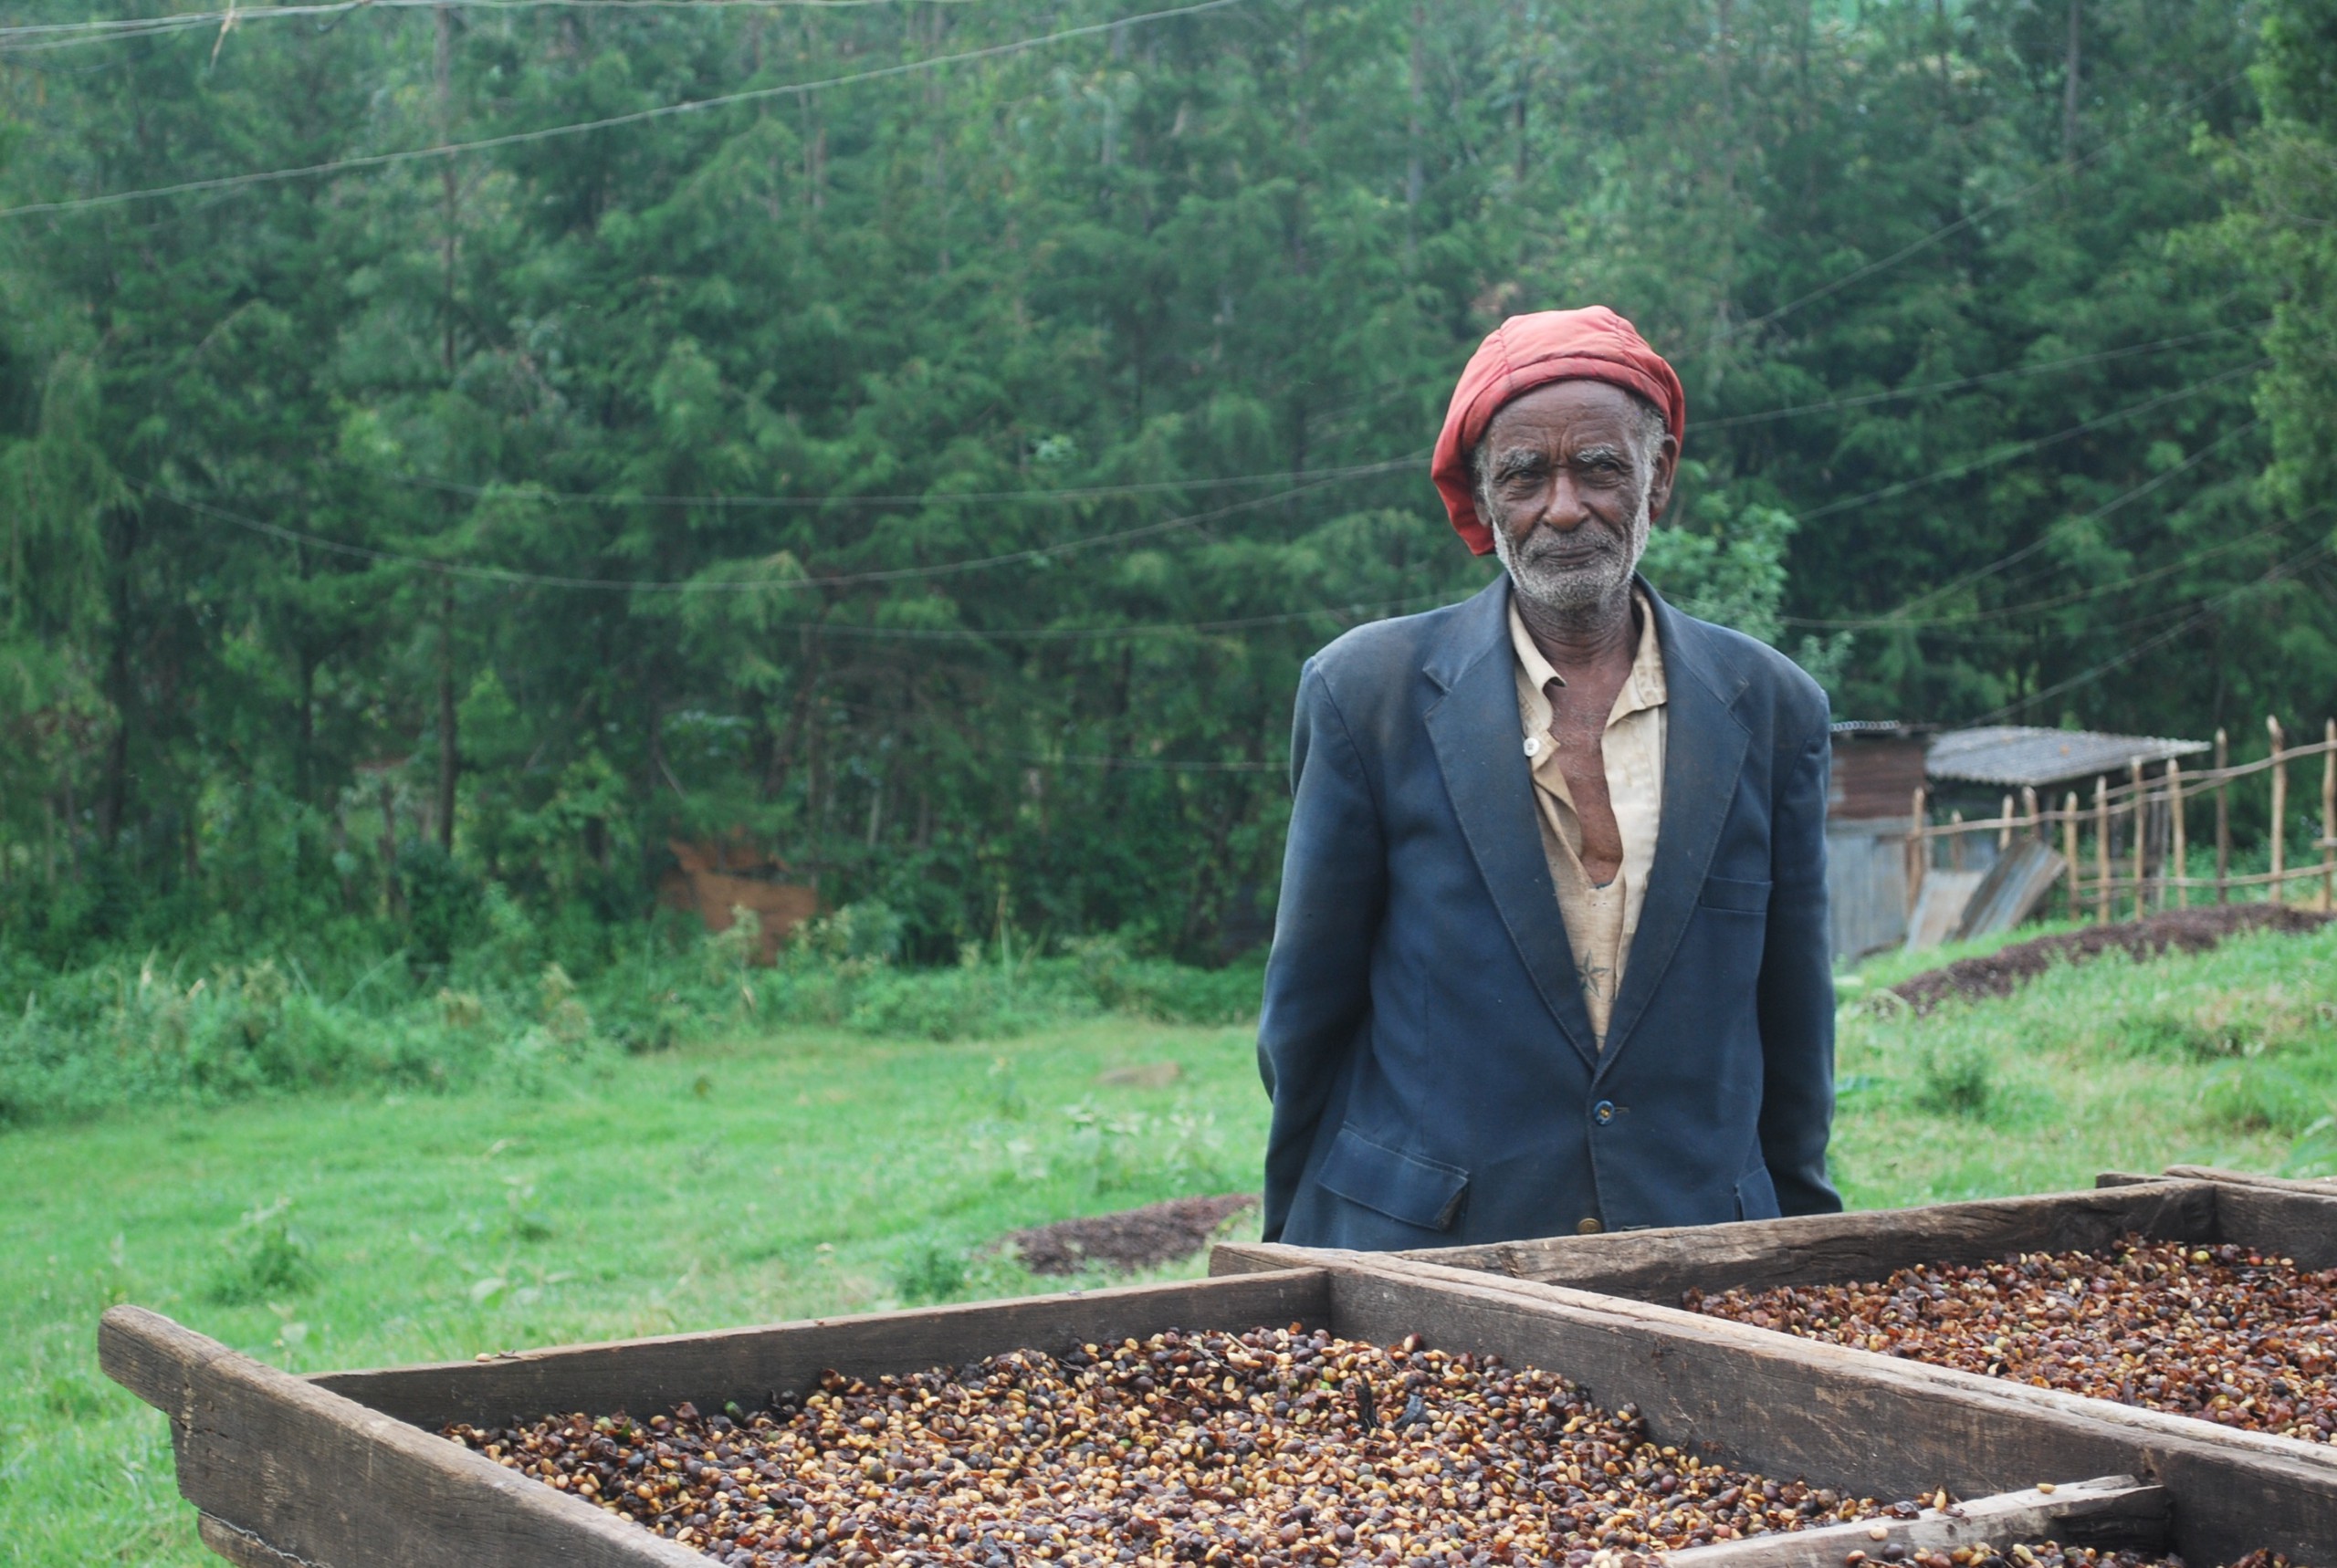 An Ethiopian man stands next to a number of crates of freshly-picked coffee beans.